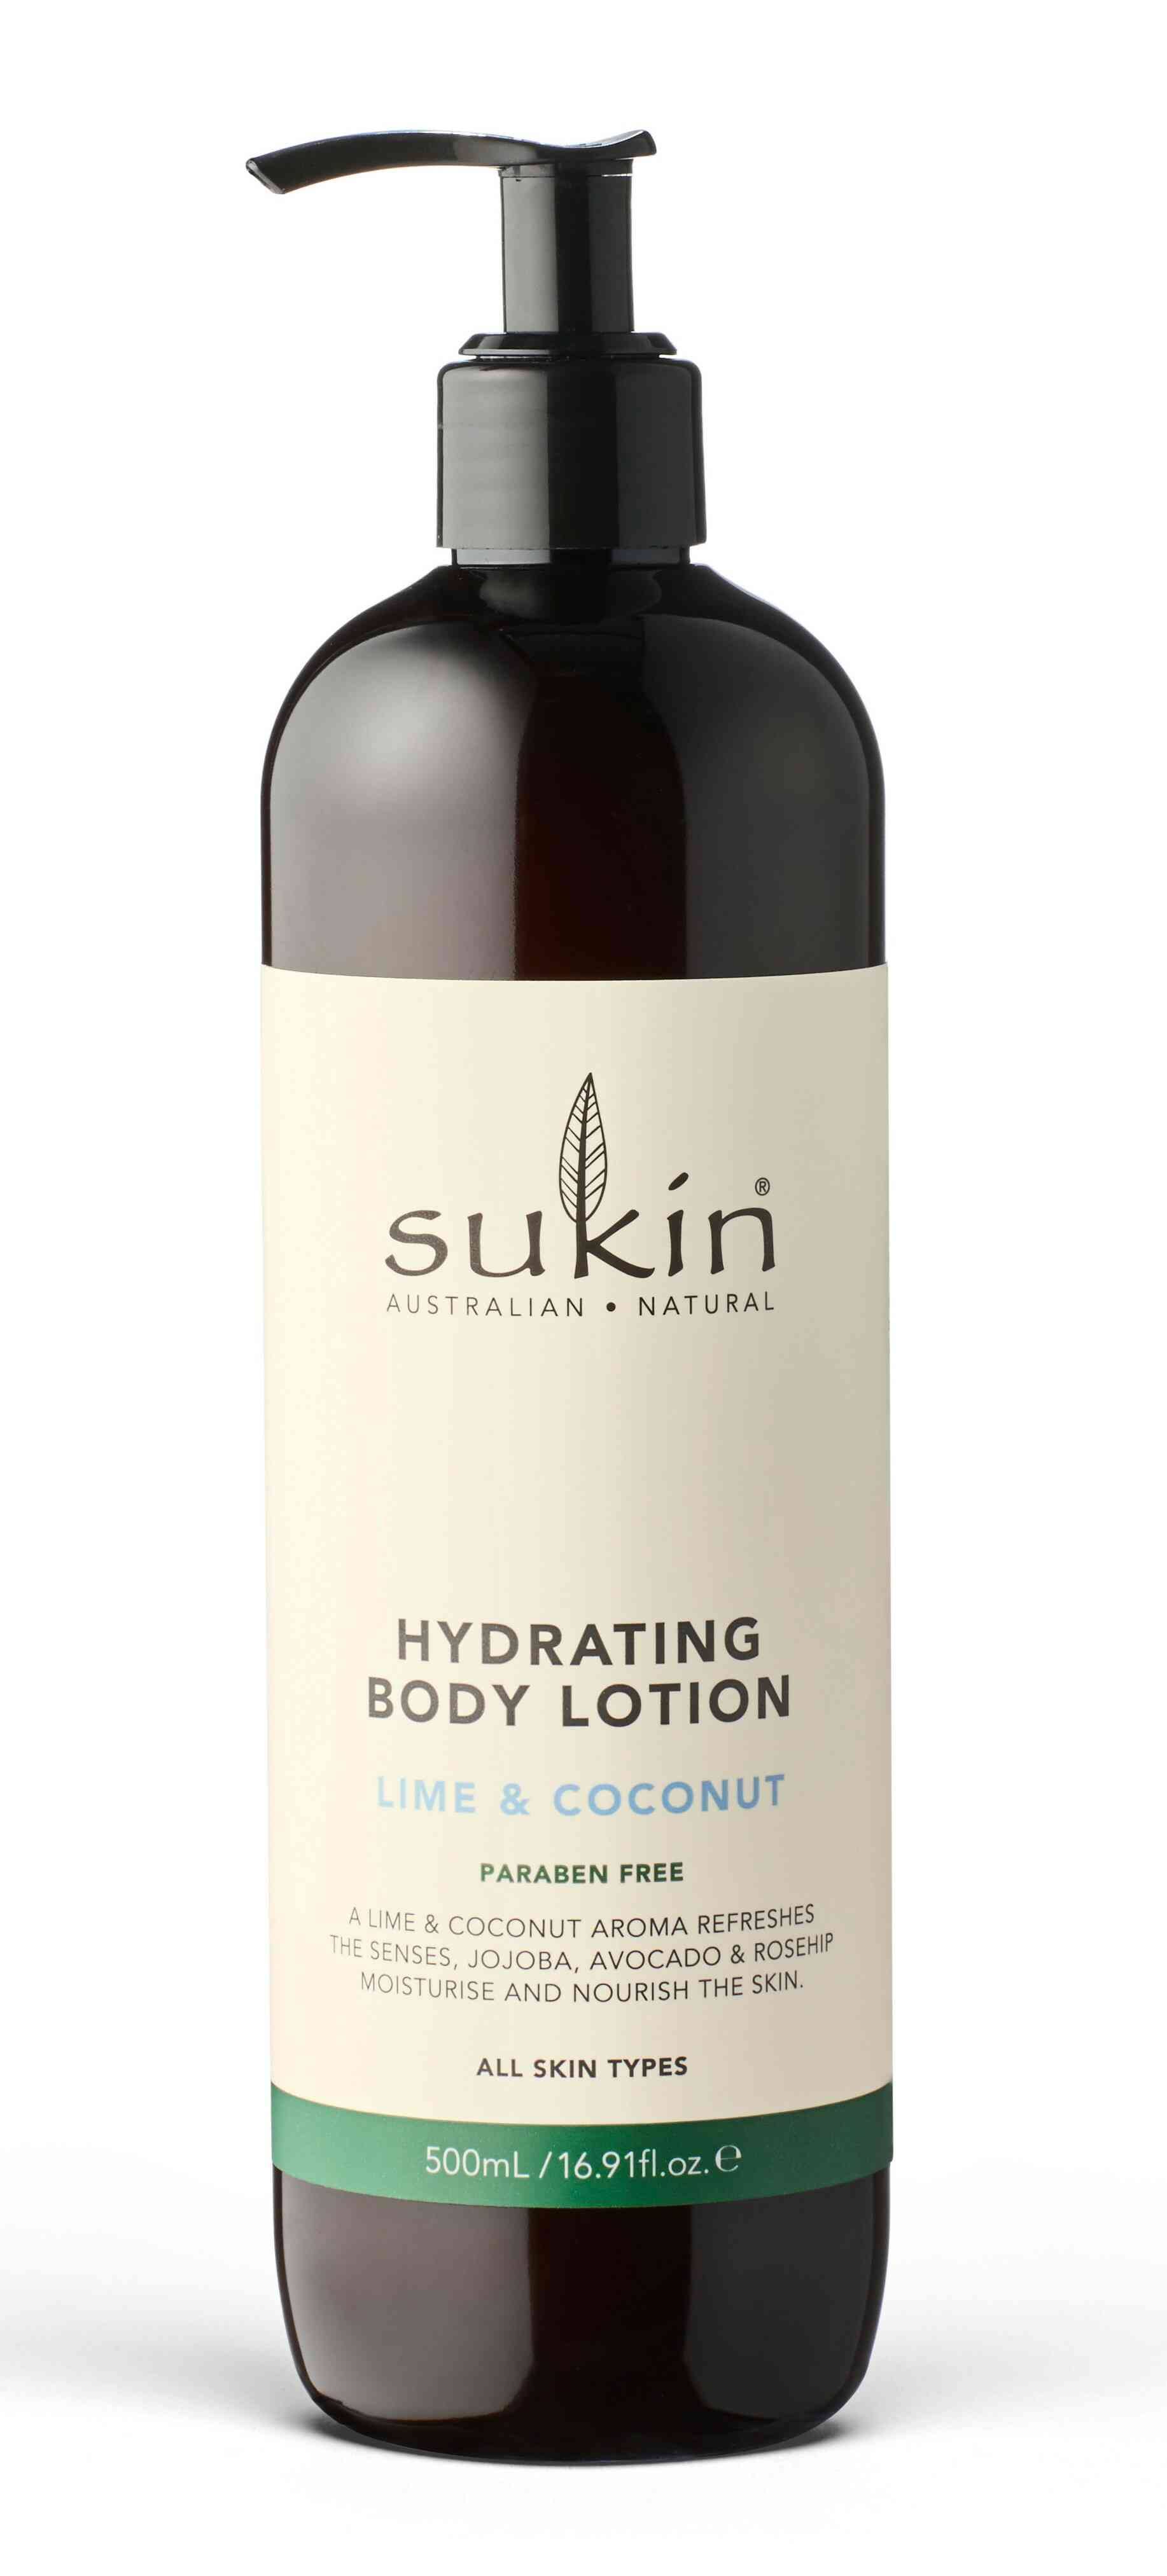 Sukin Hydrating Body Lotion - Lime and Coconut, 500ml